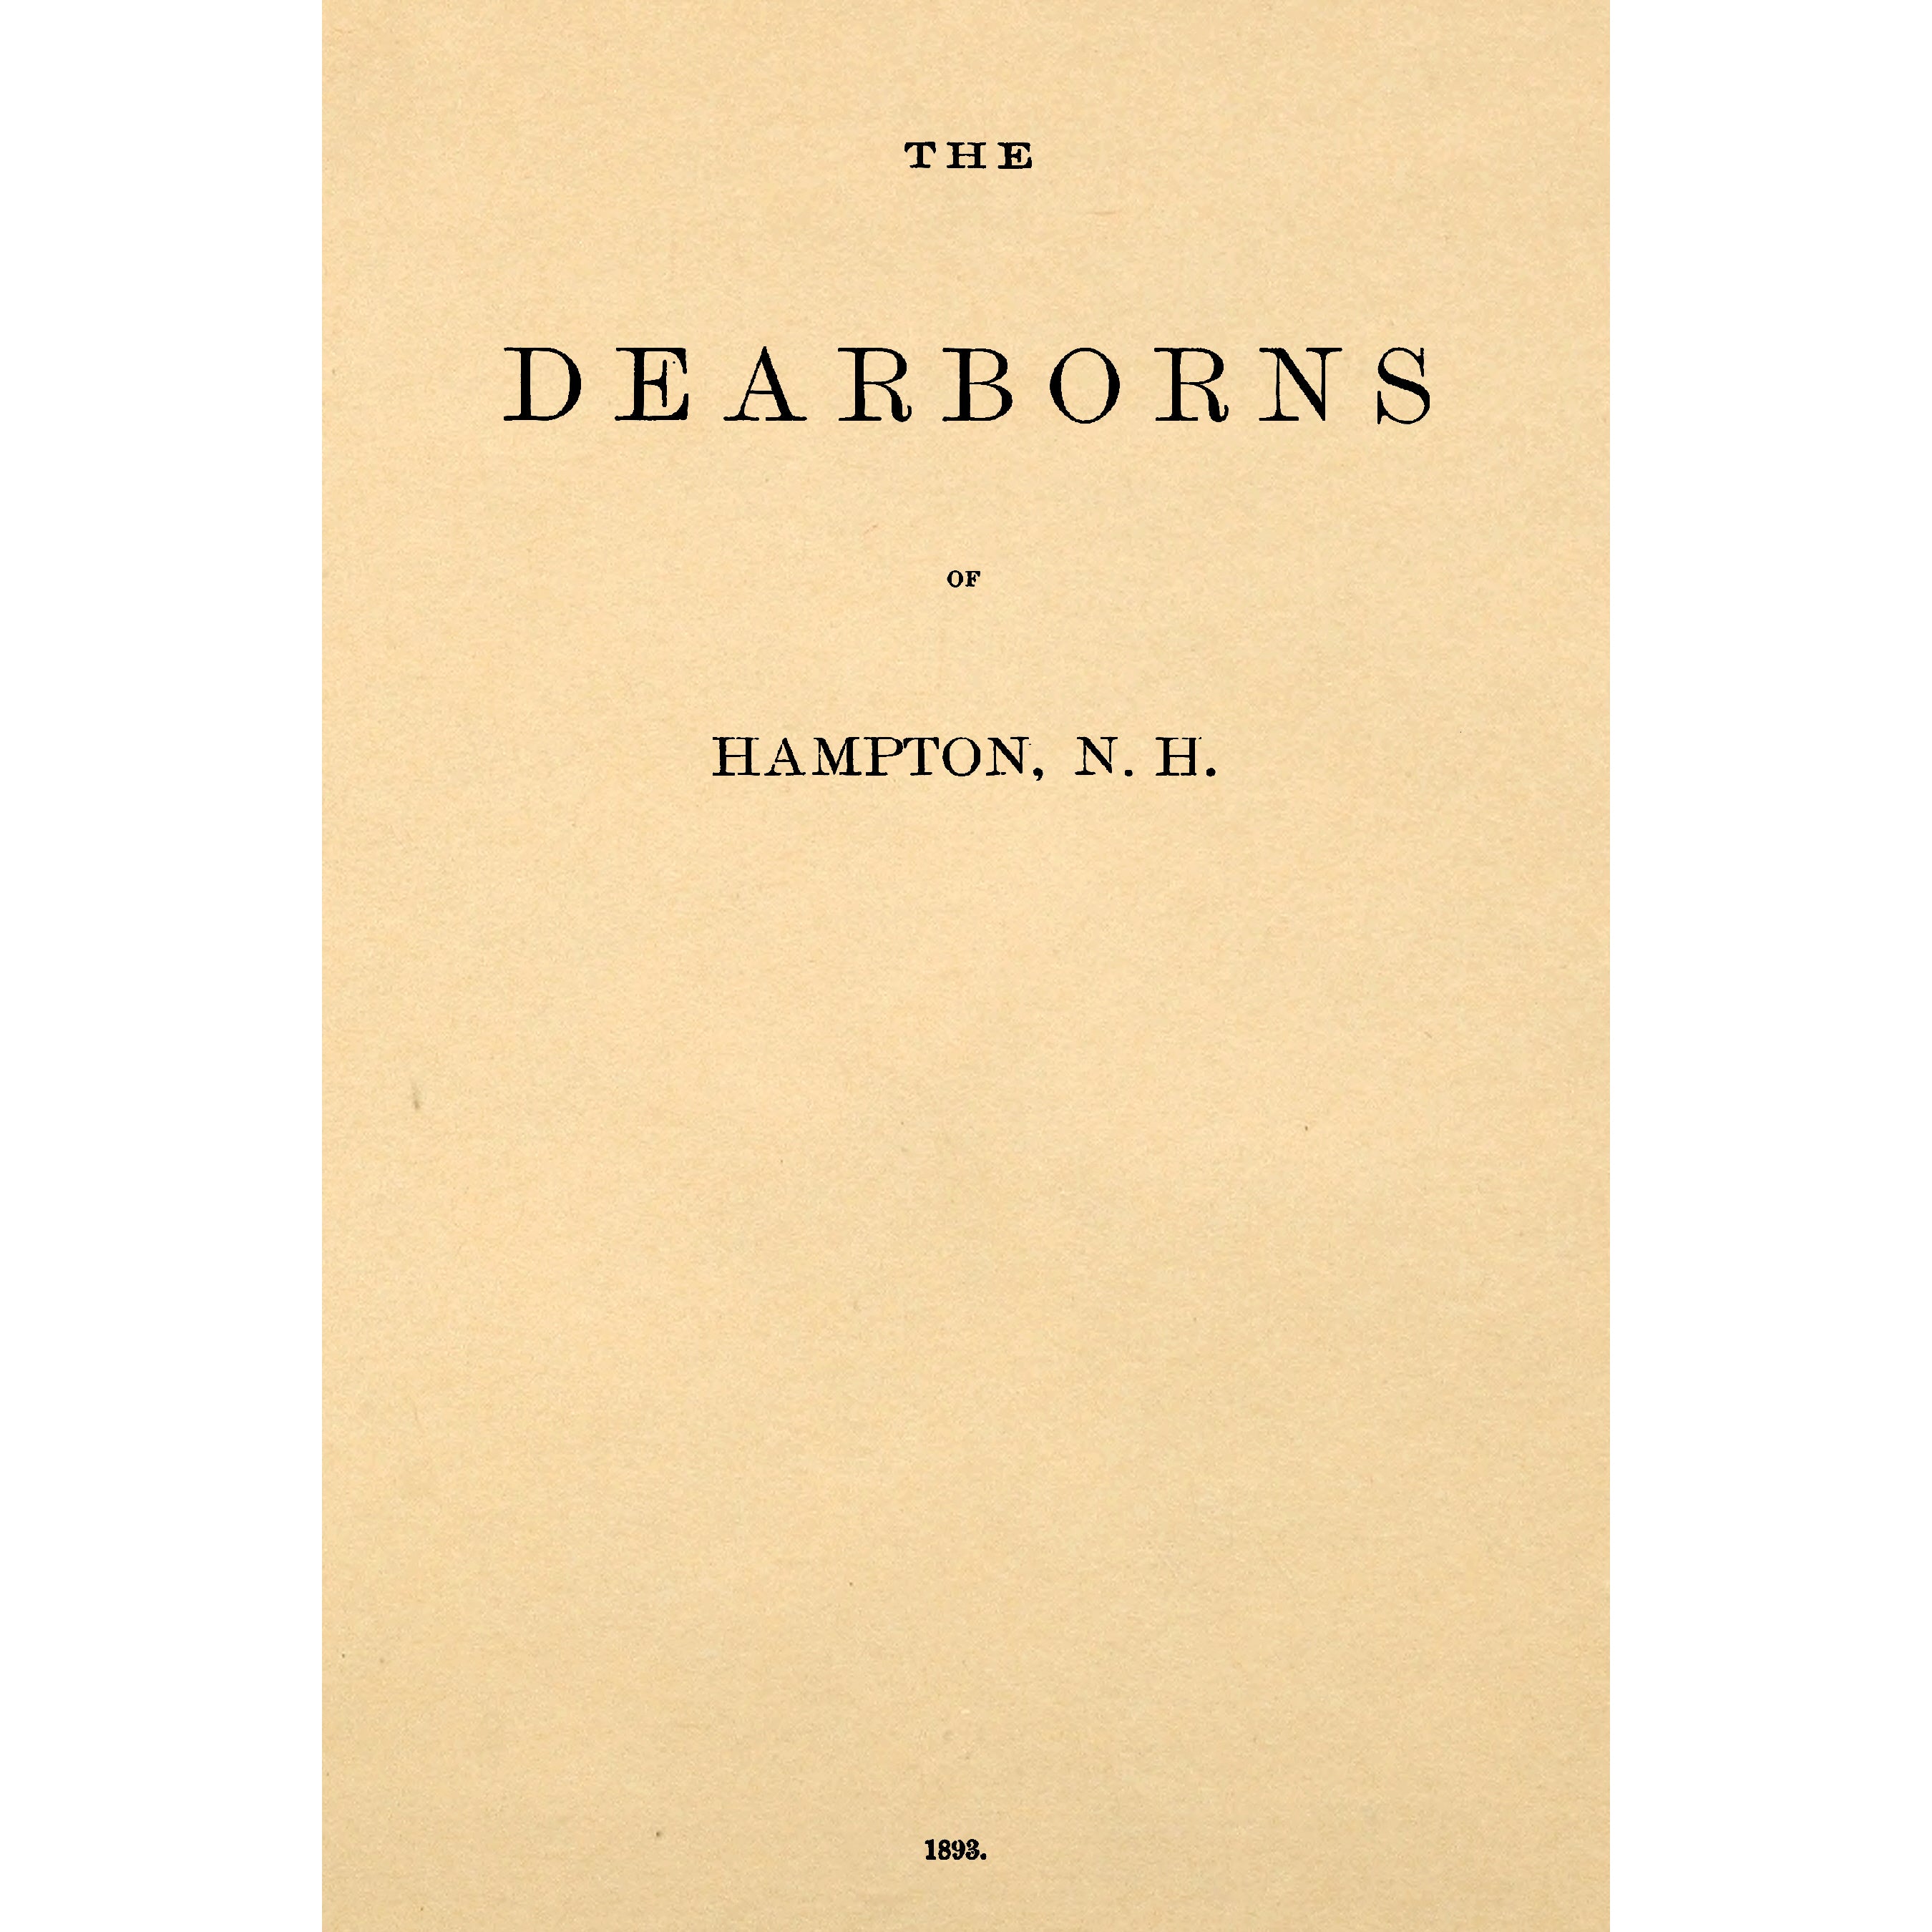 The Dearborns of Hampton, N.H. : descendants of Godfrey Dearborn of Exeter and Hampton, from History of Hampton, N.H.